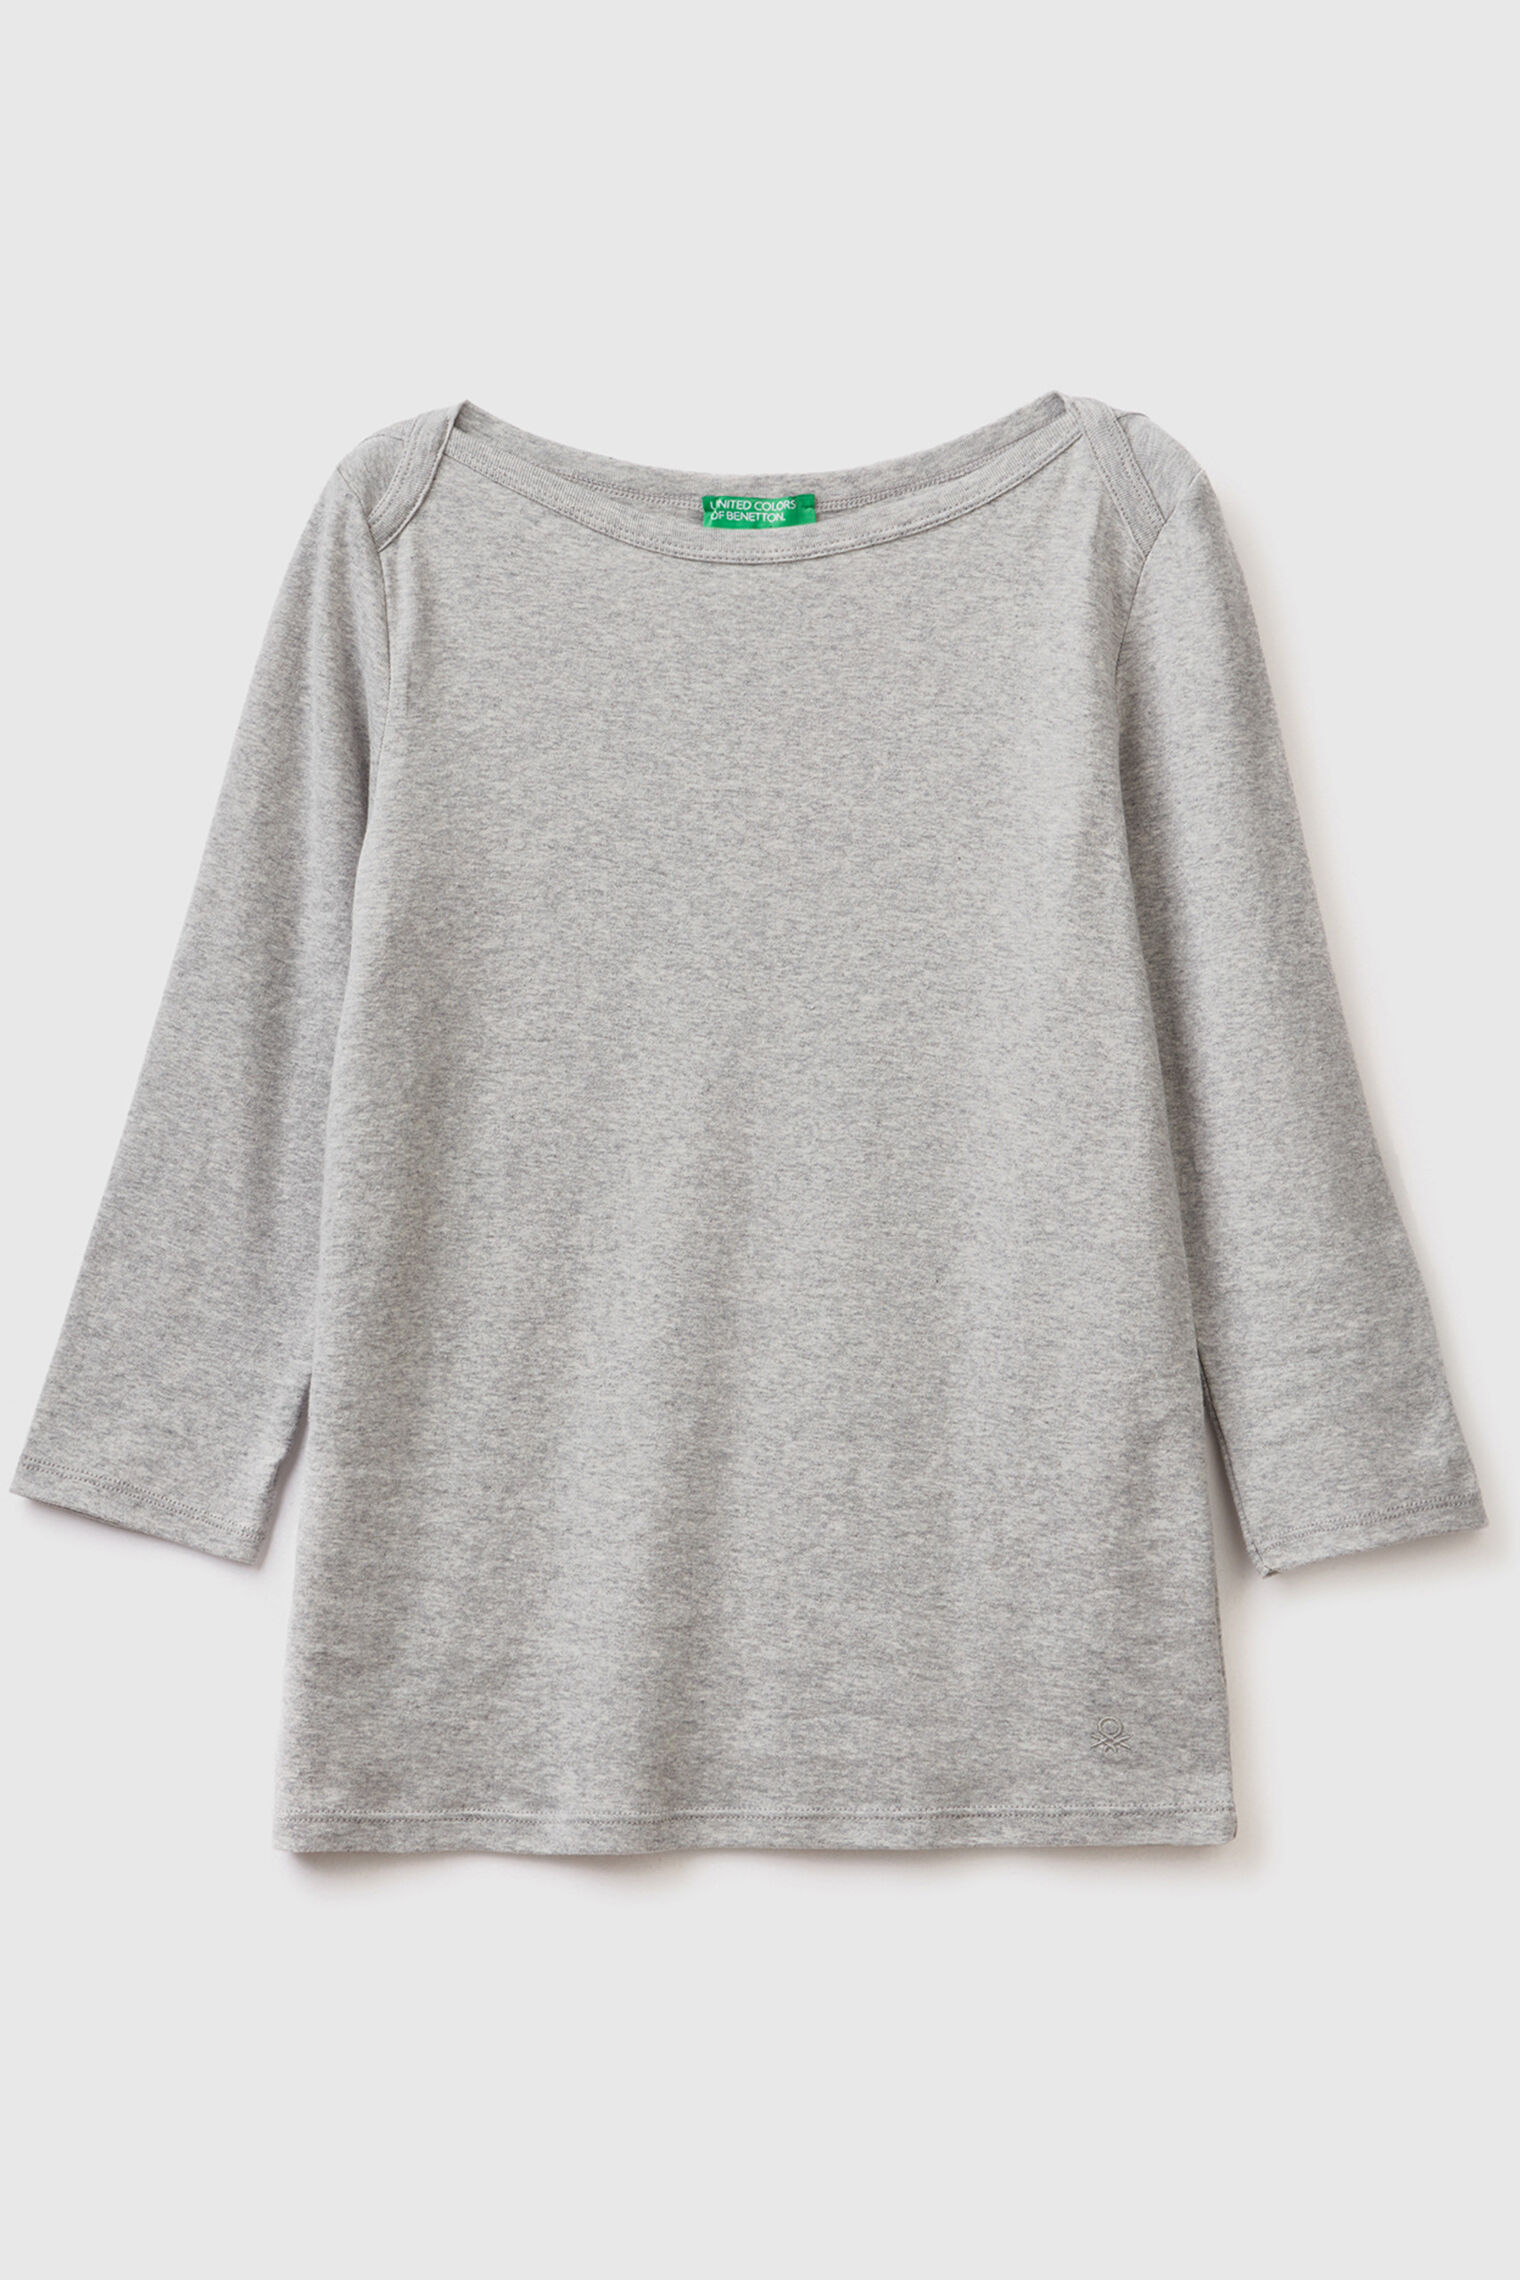 Women's T-shirts and Tops New Collection 2023 | Benetton